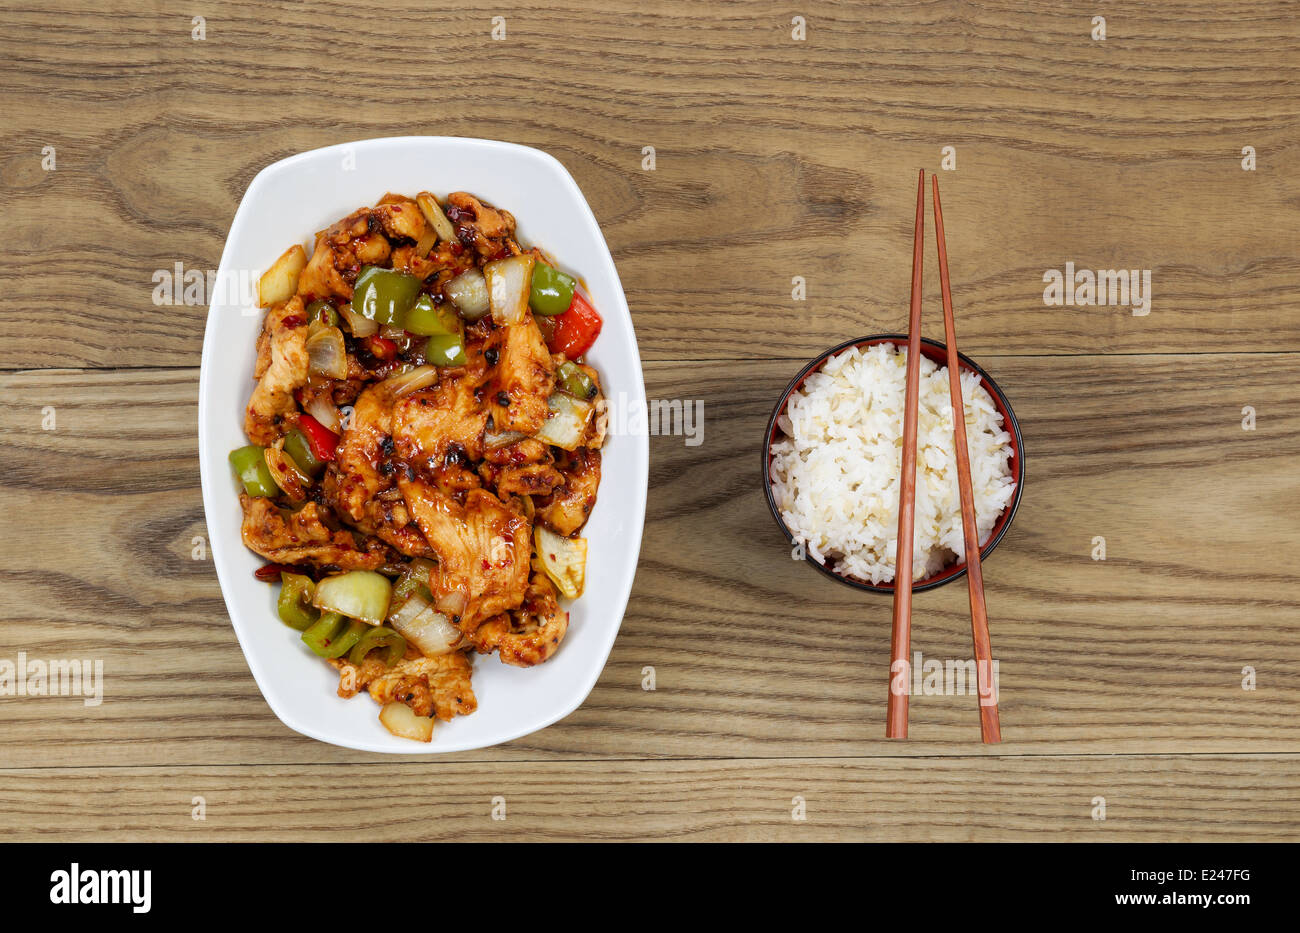 Overhead view of Chinese spicy chicken dish and rice in bowl with chopsticks placed on rustic wooden boards. Stock Photo